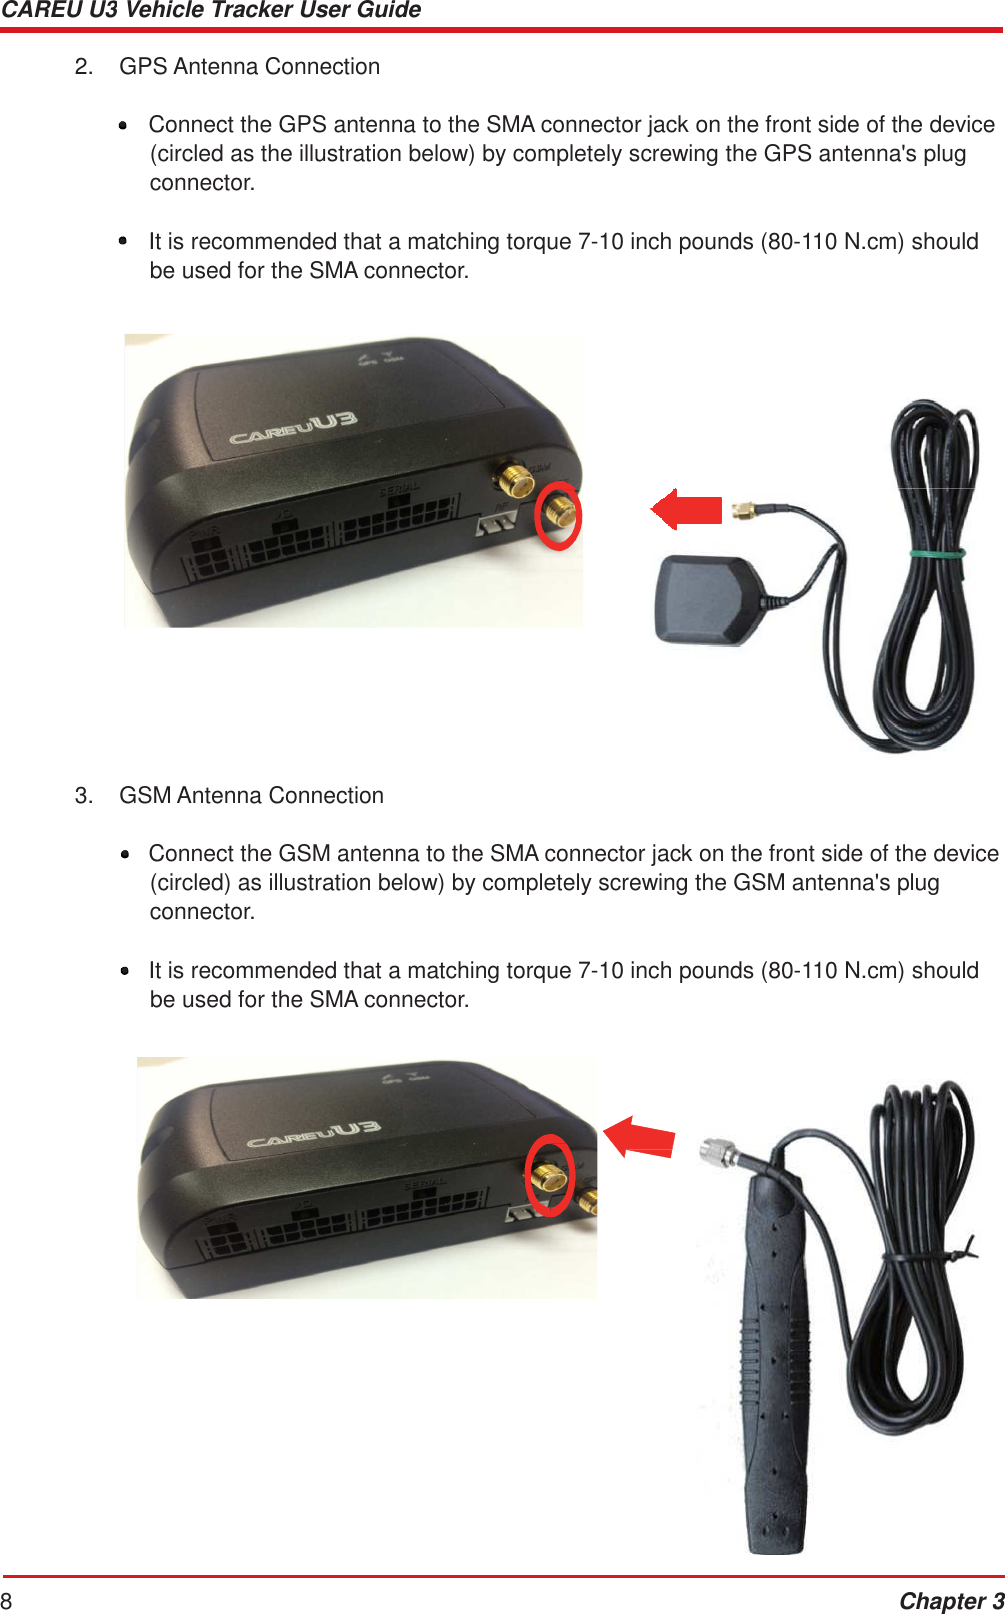 CAREU U3 Vehicle Tracker User Guide 8 Chapter 3          2.  GPS Antenna Connection   •  Connect the GPS antenna to the SMA connector jack on the front side of the device (circled as the illustration below) by completely screwing the GPS antenna&apos;s plug connector.  •  It is recommended that a matching torque 7-10 inch pounds (80-110 N.cm) should be used for the SMA connector.                         3.  GSM Antenna Connection   •  Connect the GSM antenna to the SMA connector jack on the front side of the device (circled) as illustration below) by completely screwing the GSM antenna&apos;s plug connector.  •  It is recommended that a matching torque 7-10 inch pounds (80-110 N.cm) should be used for the SMA connector.     